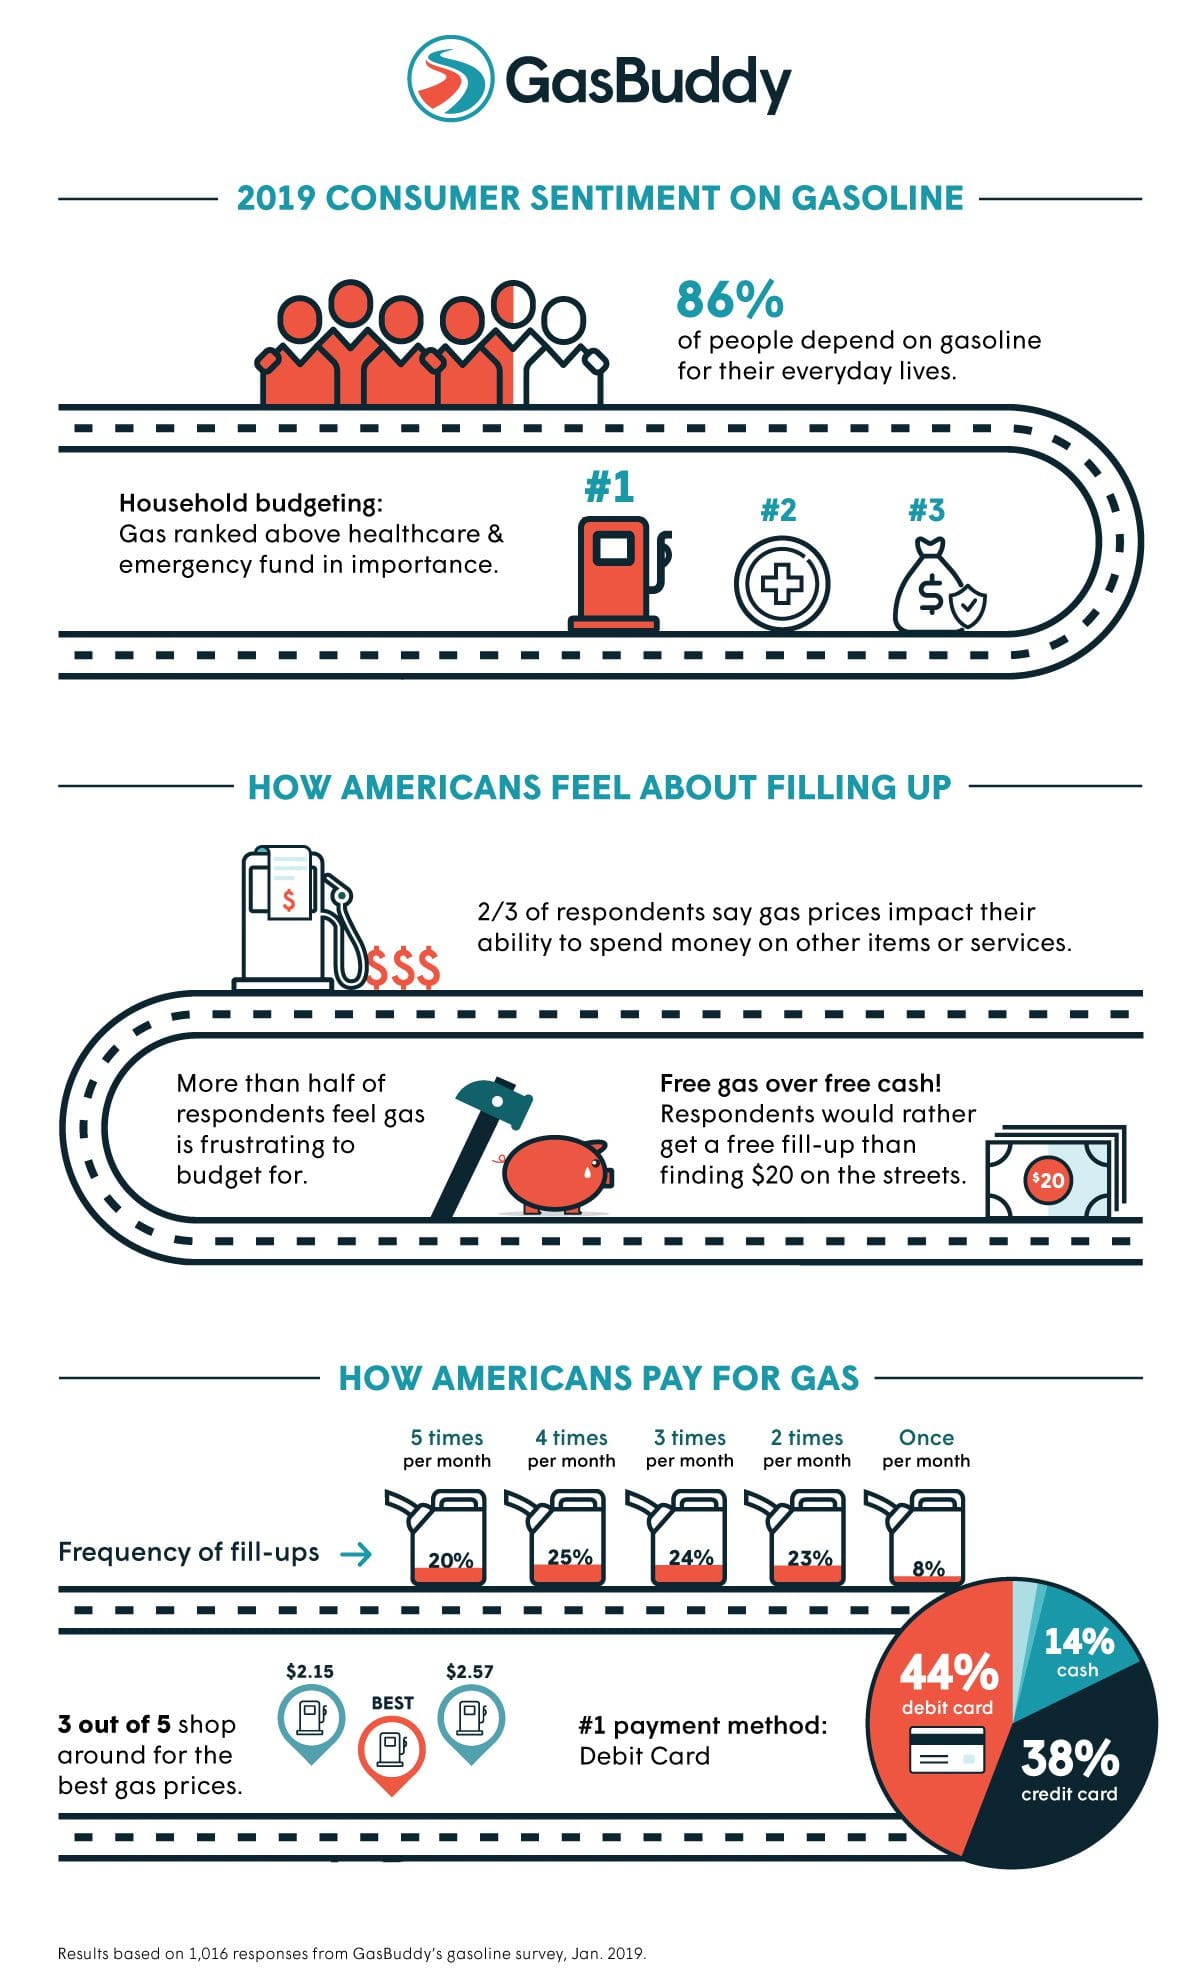 Gasoline is More Important Than Healthcare for Americans